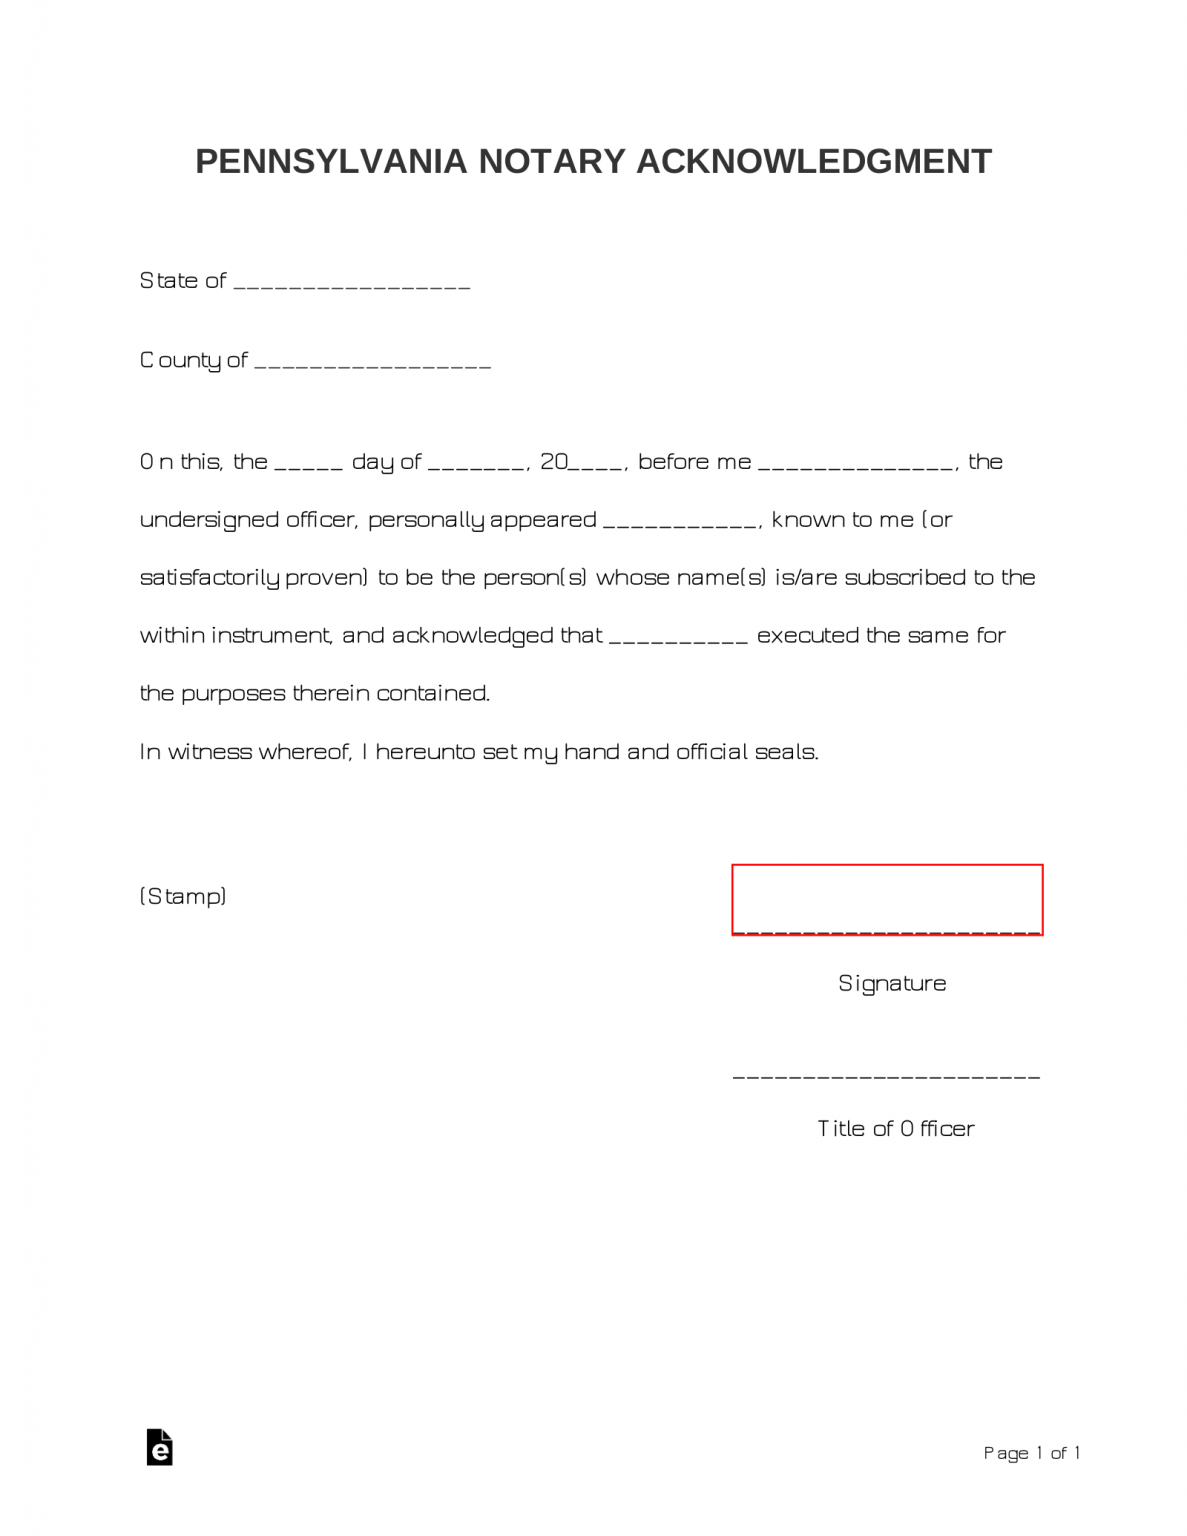 free-pennsylvania-notary-acknowledgment-form-pdf-word-eforms